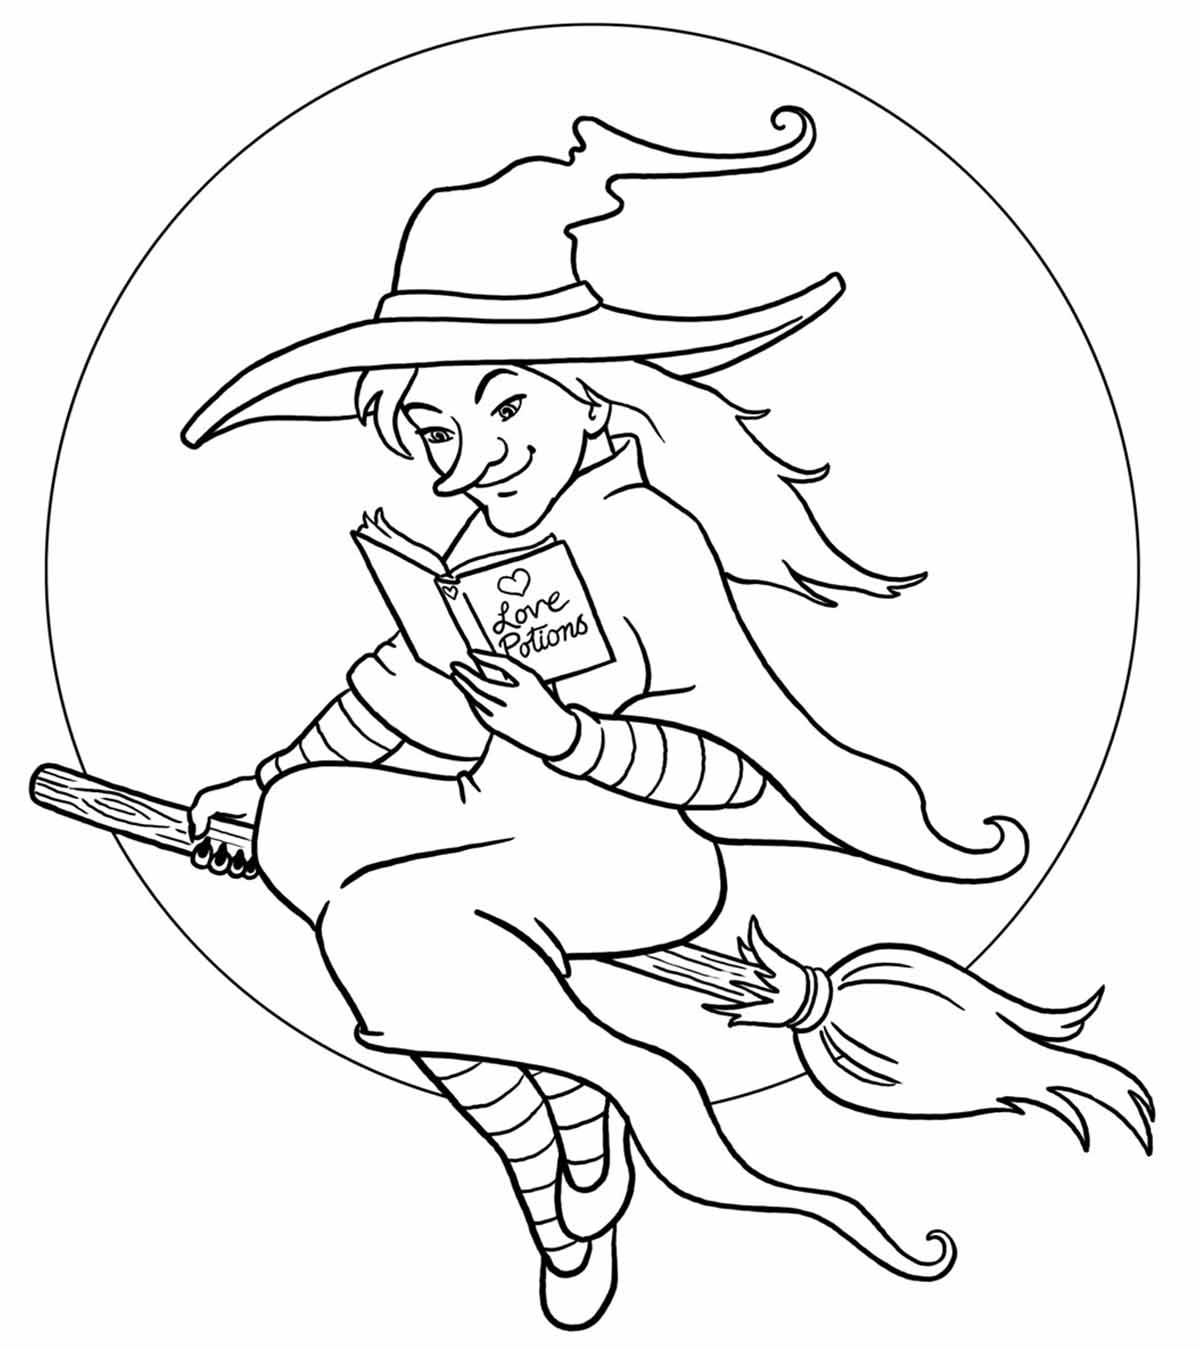 Top 15 The Wizard Of Oz Coloring Pages For Your Toddler